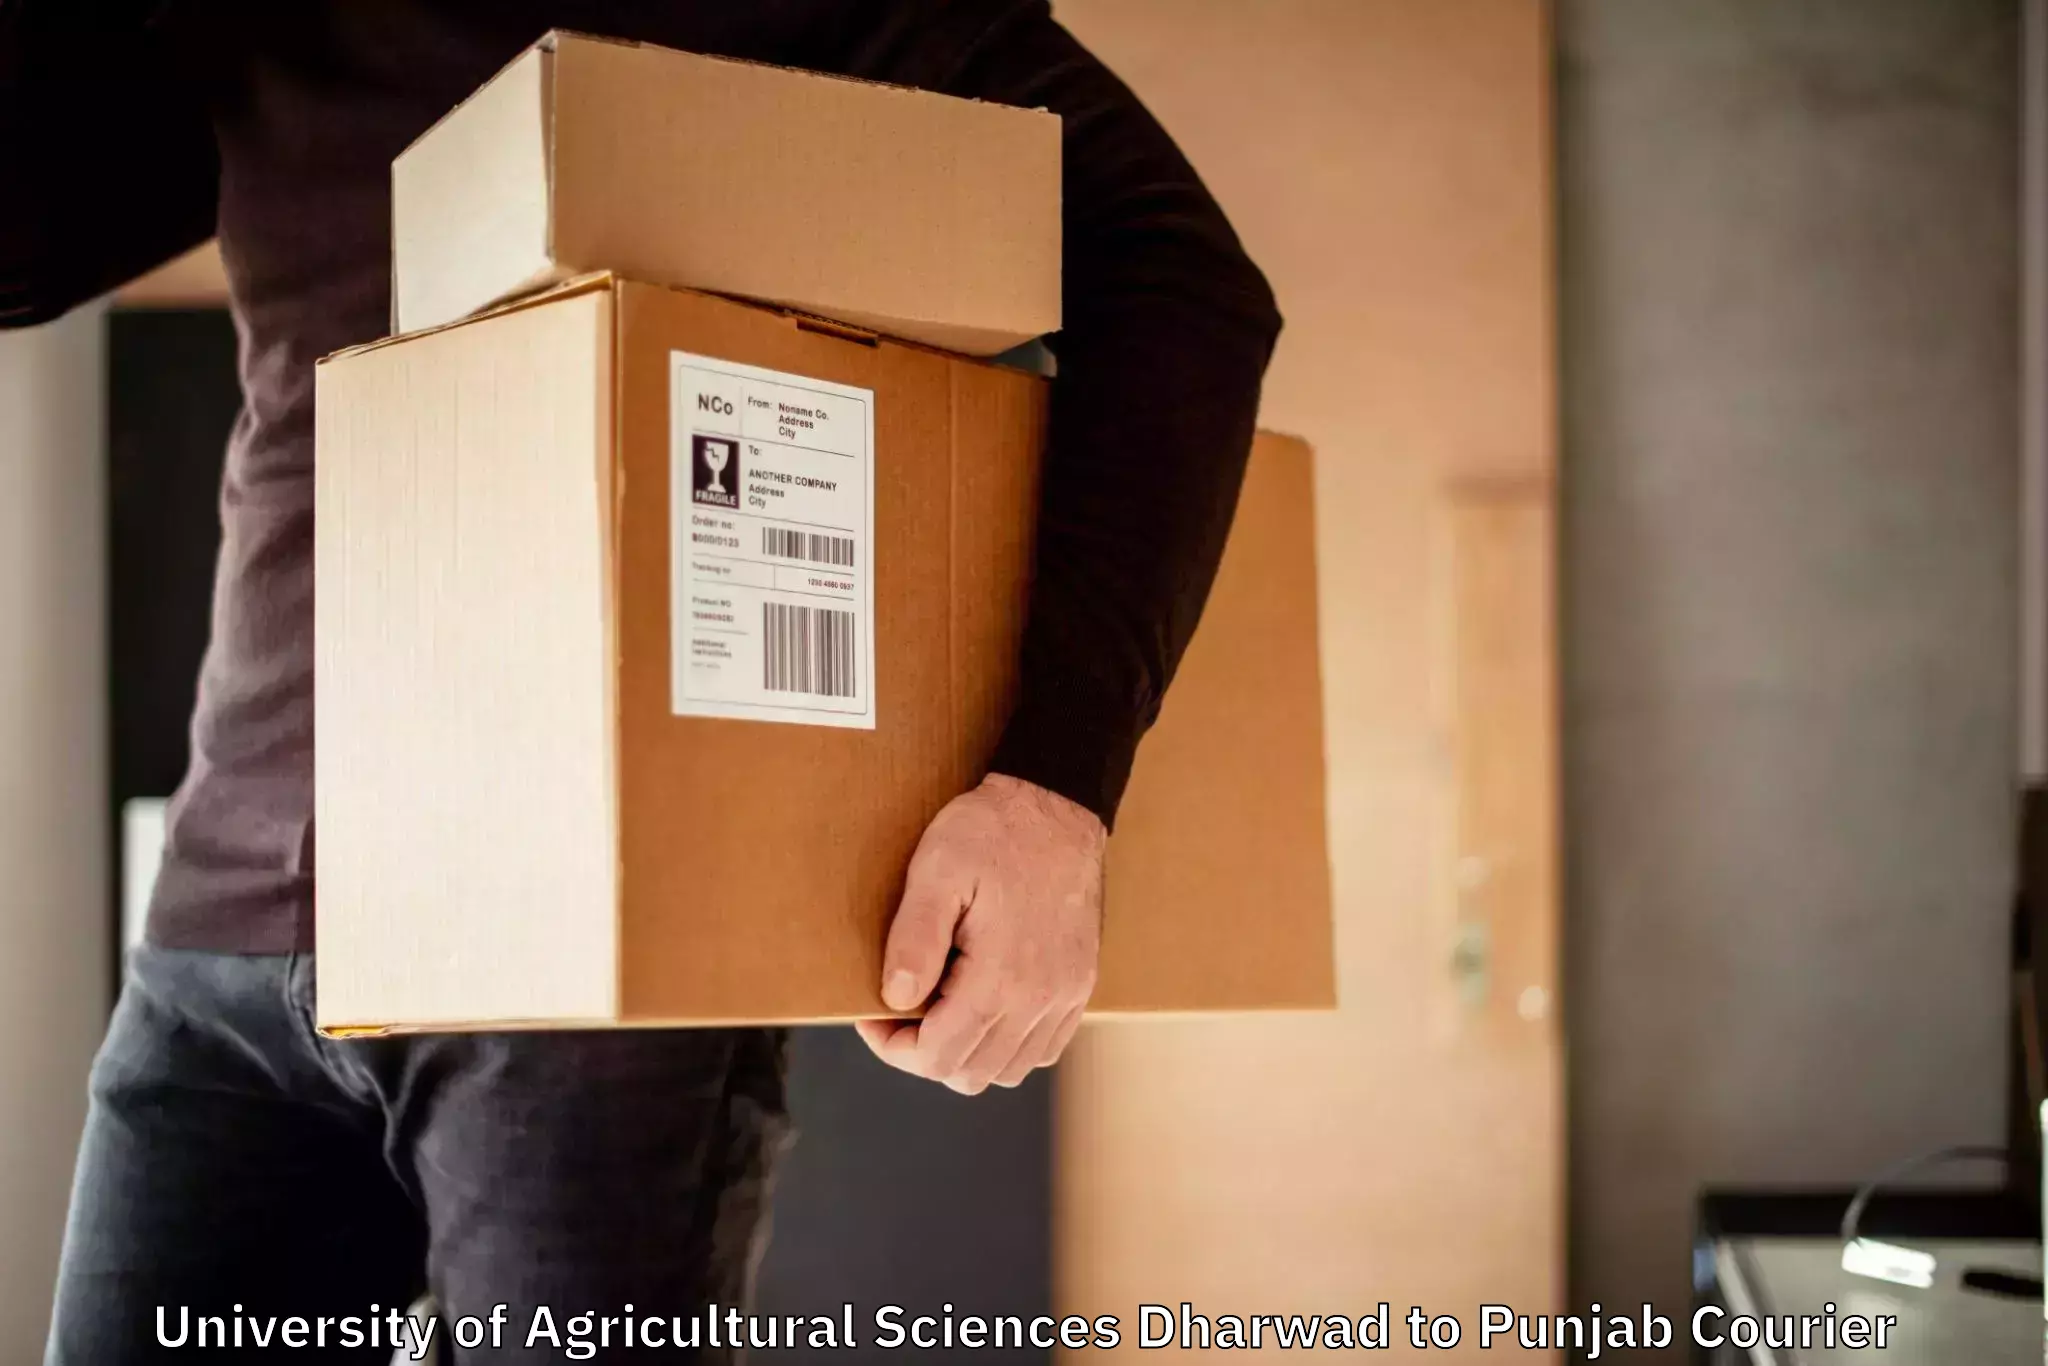 Efficient package consolidation University of Agricultural Sciences Dharwad to Sultanpur Lodhi